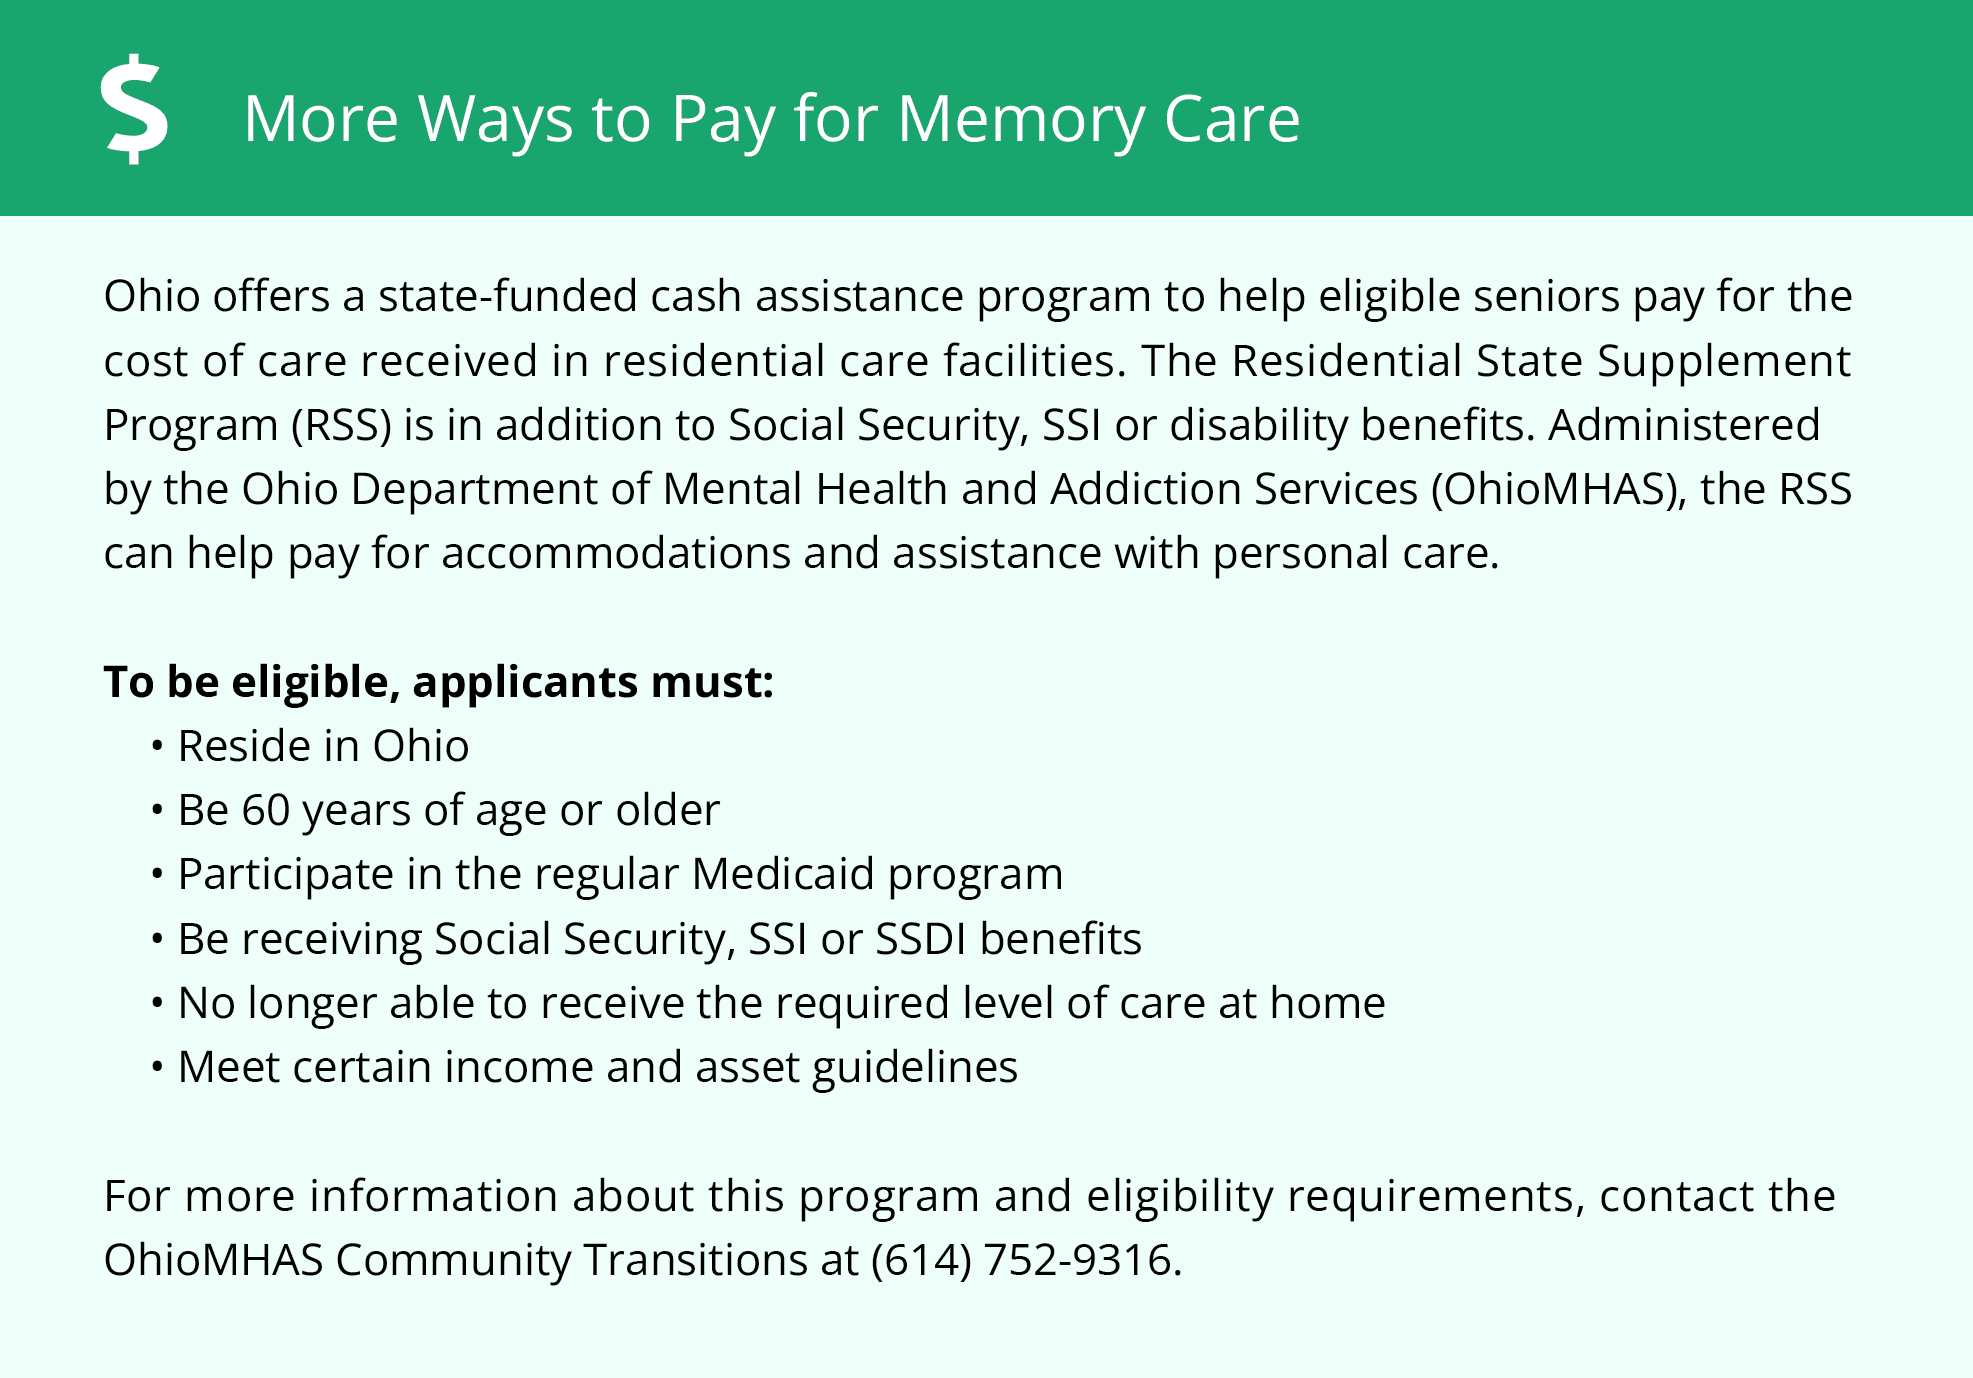 Financial Assistance for Memory Care in Ohio